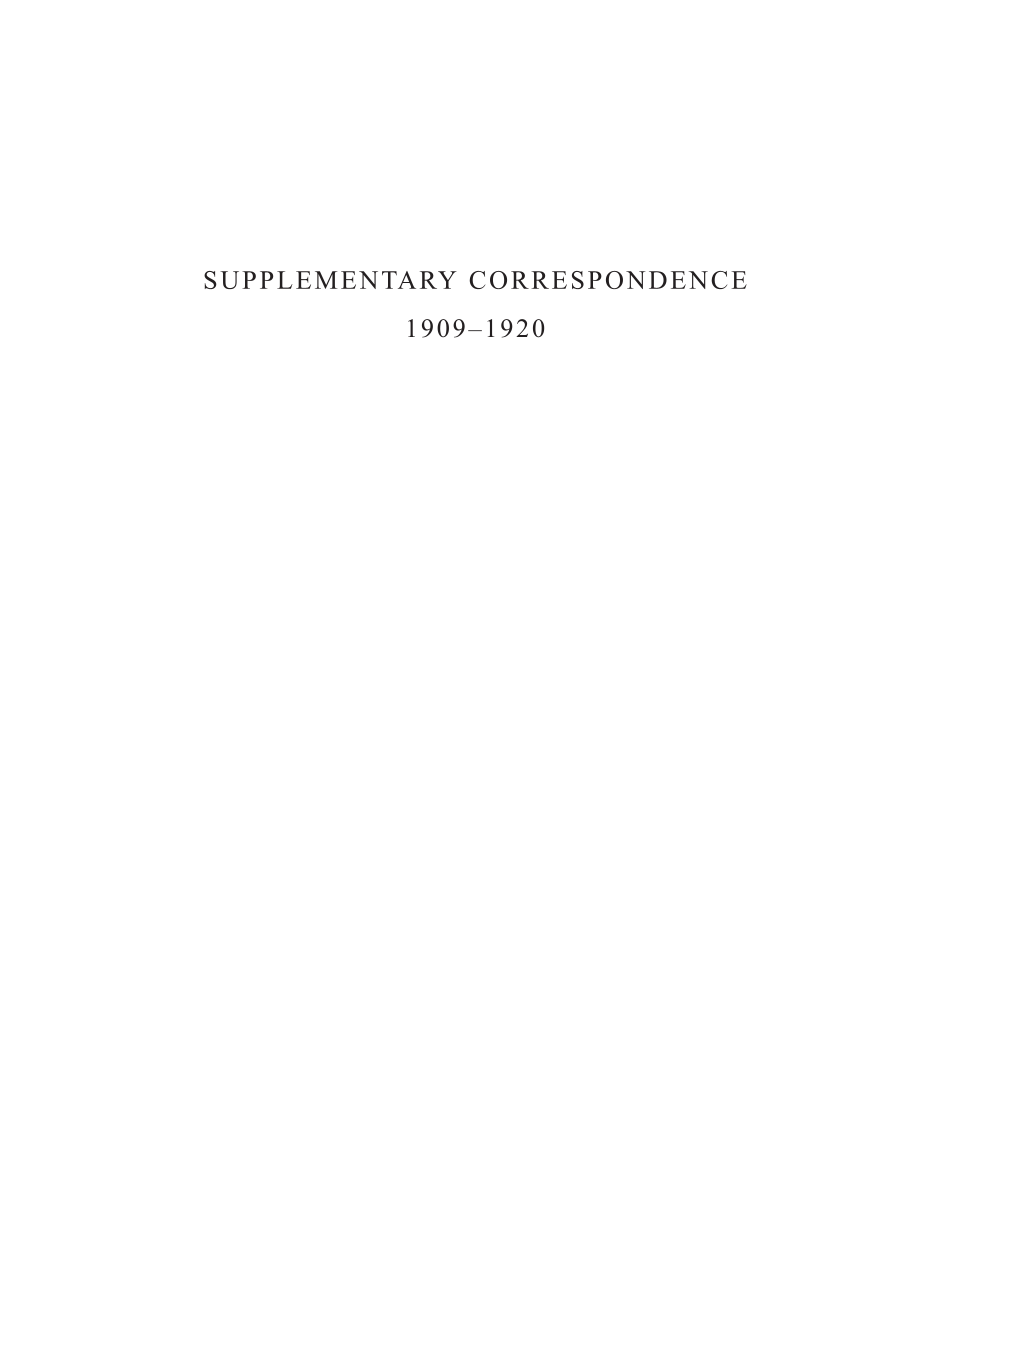 Volume 10: The Berlin Years: Correspondence May-December 1920 / Supplementary Correspondence 1909-1920 page 3